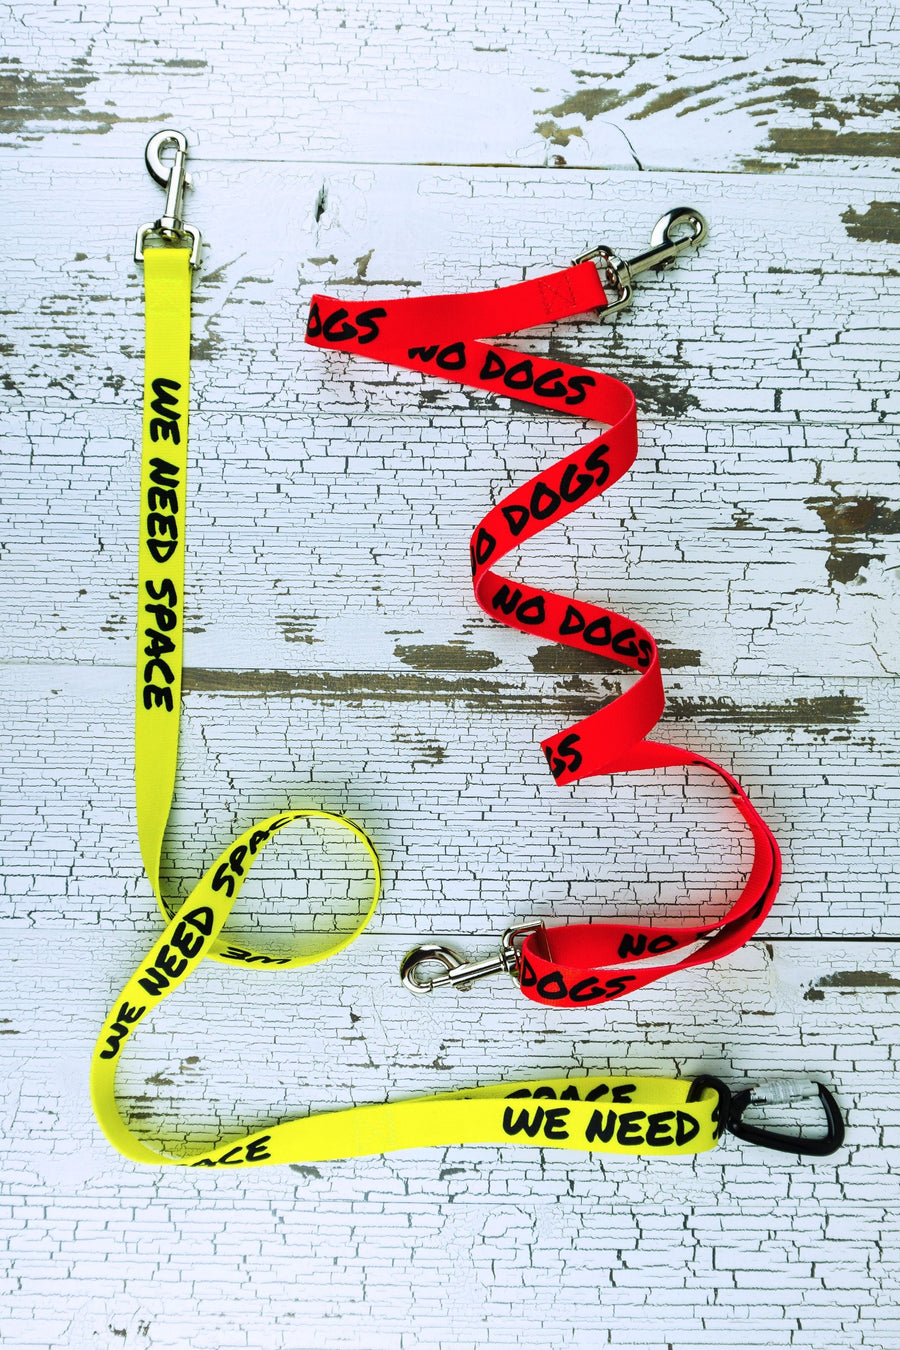 These hands free leashes with safety messages are shown here in a 6 foot length, including the we need space message on yellow with the auto locking carabiner hardware selection, and the no dogs on red message with the snap bolt hardware option.